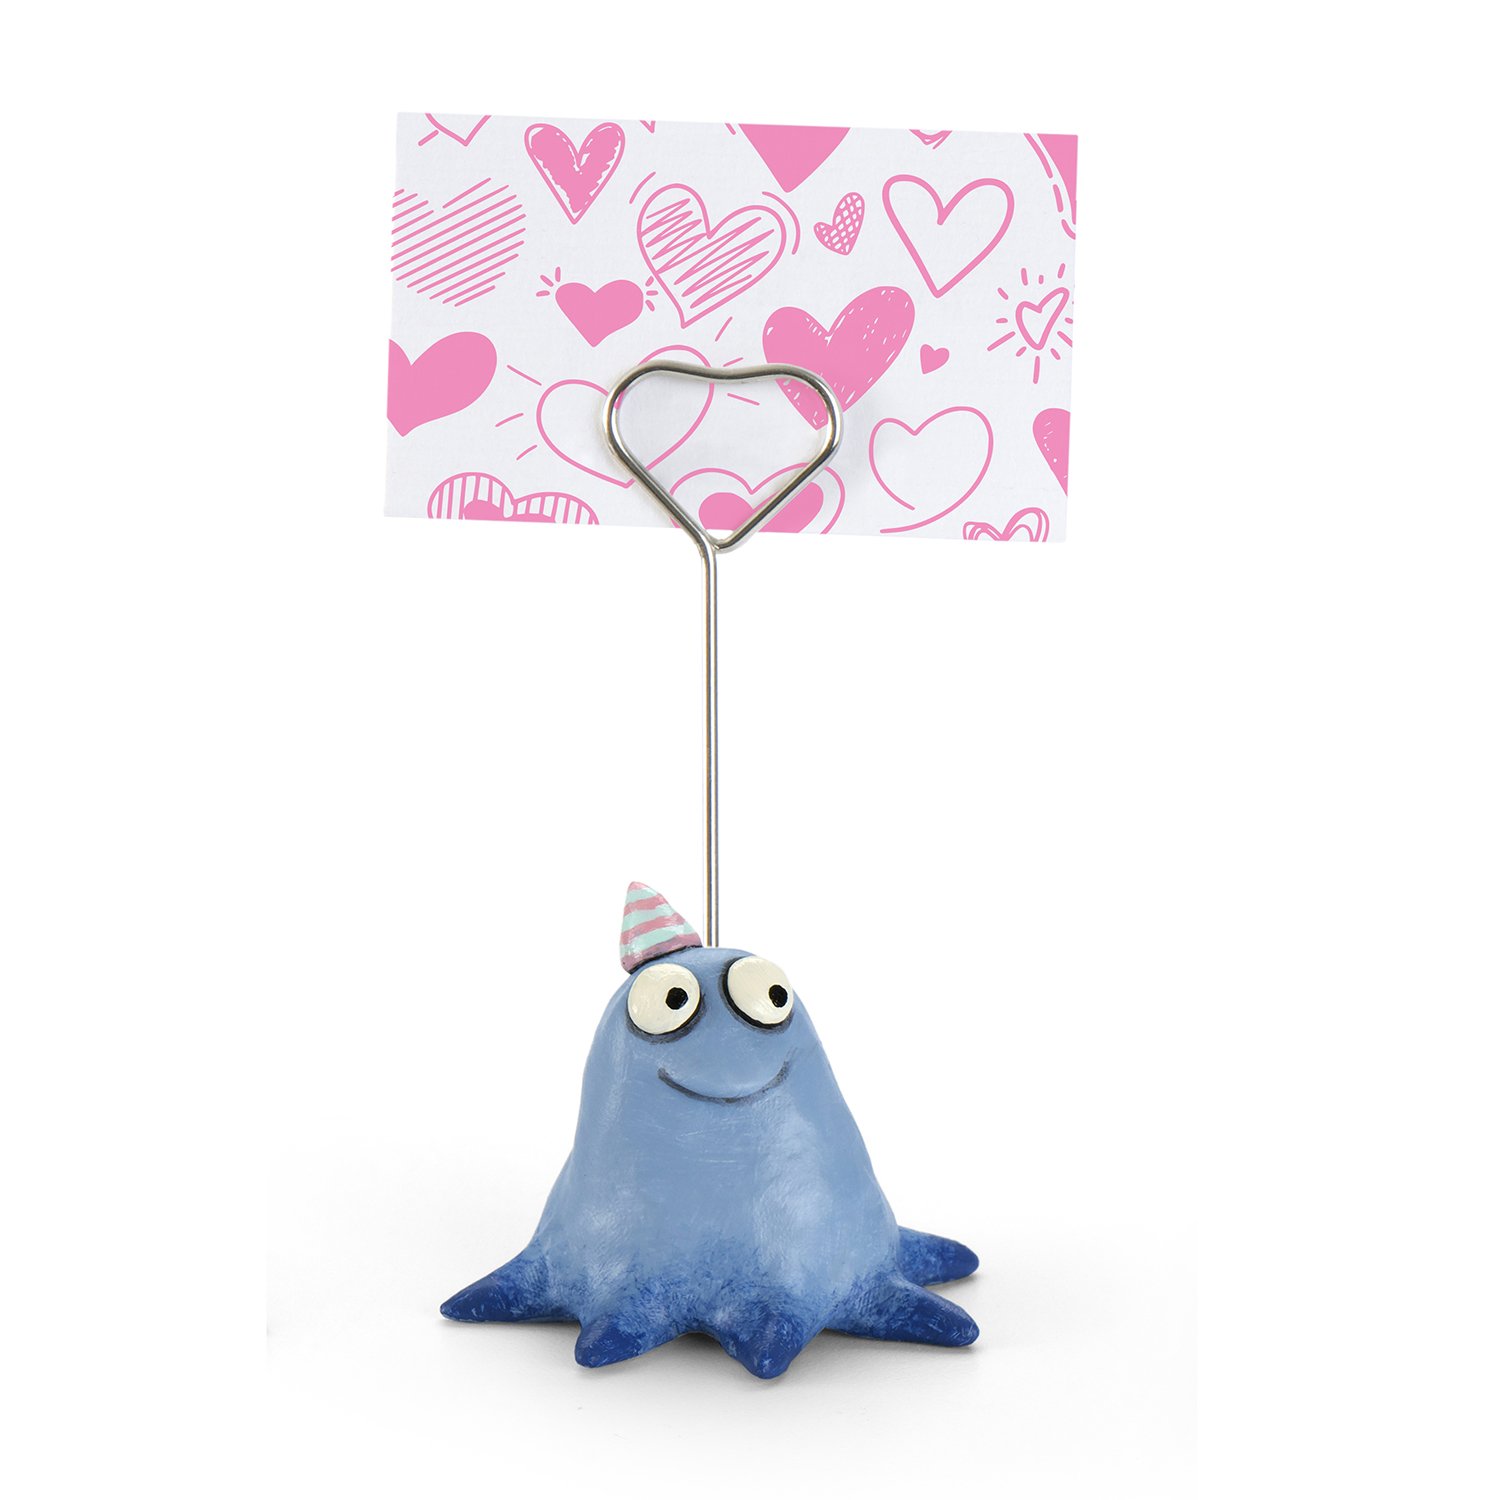 G21588A - 'Joy' Party Blob with Card Holder